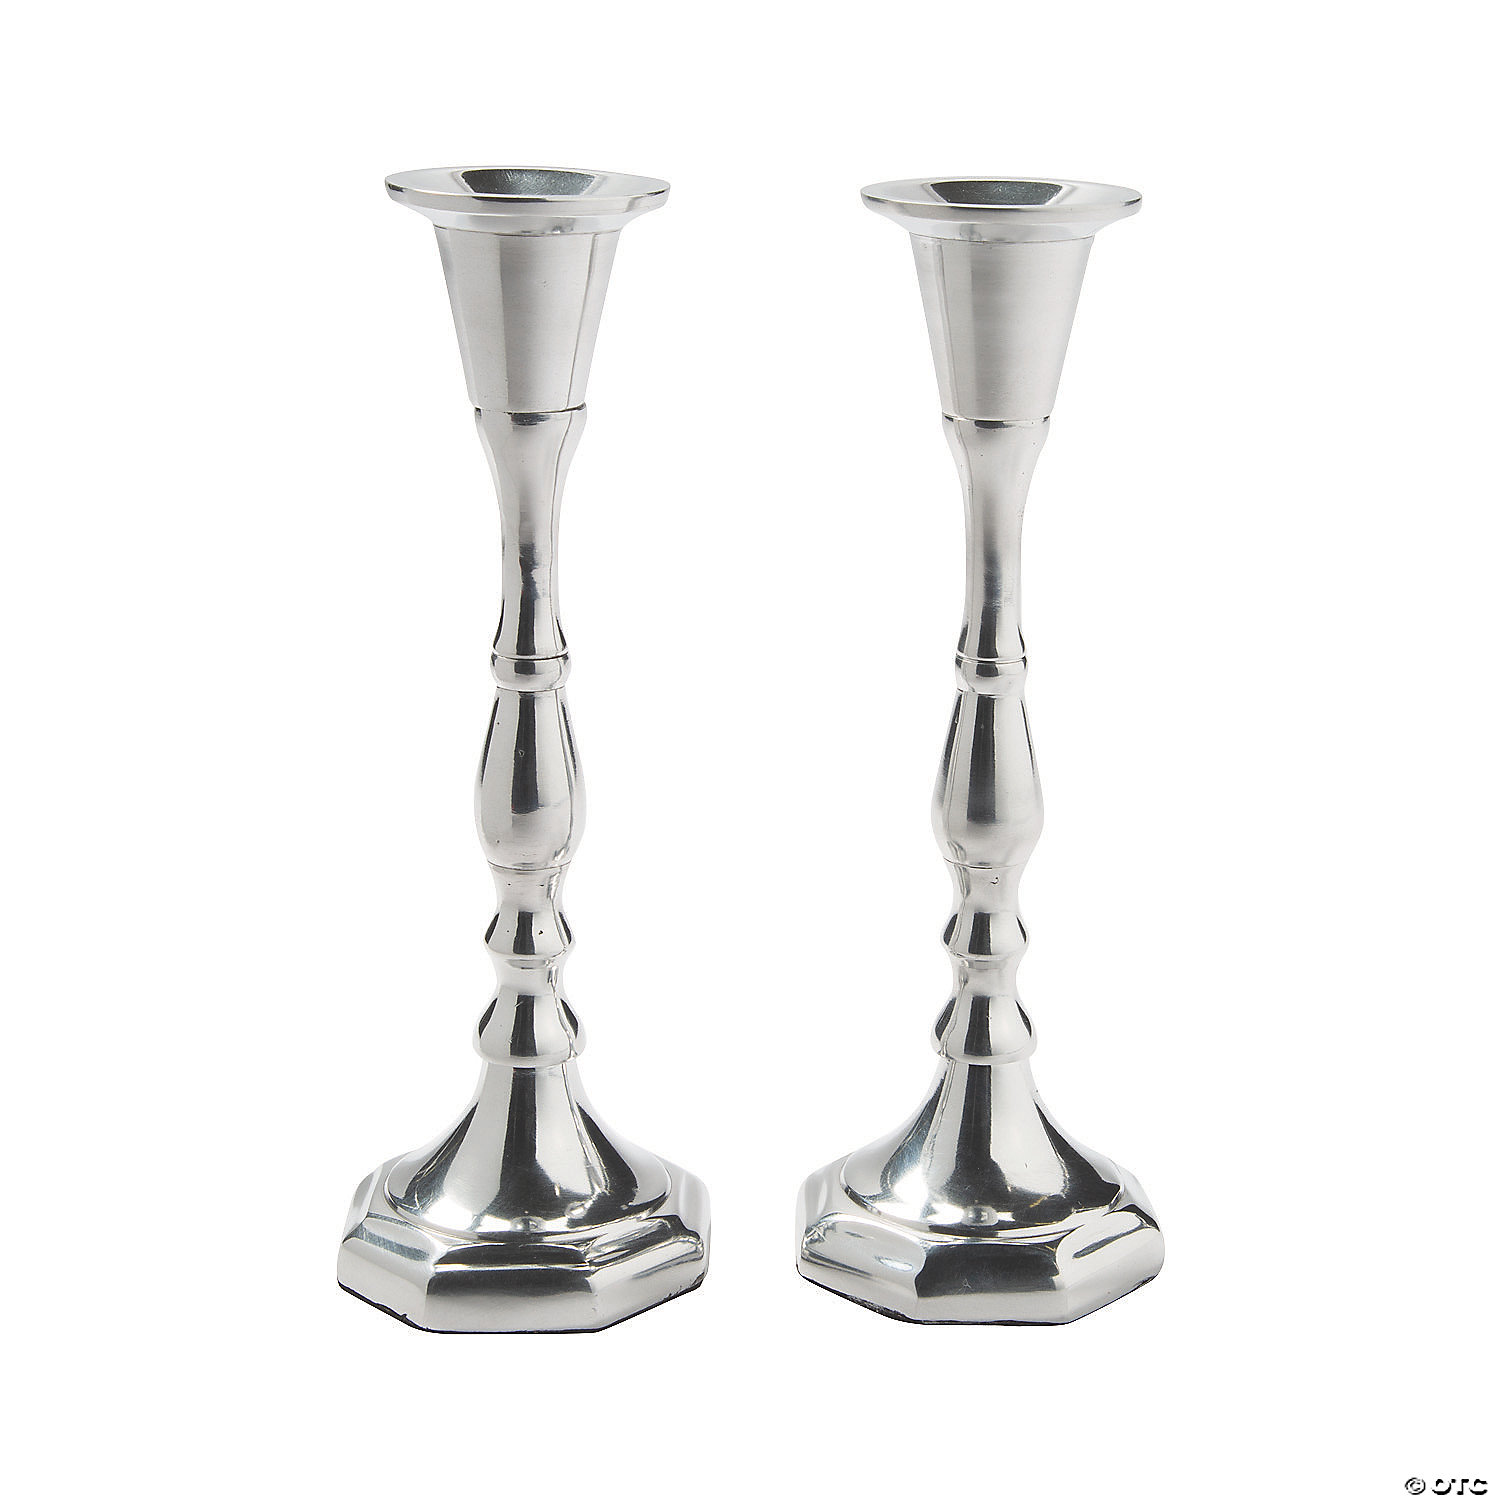 Alchemy Gothic Heart & Roses Silver Tall Taper Candlestick Holders Grey 2 pc Set 